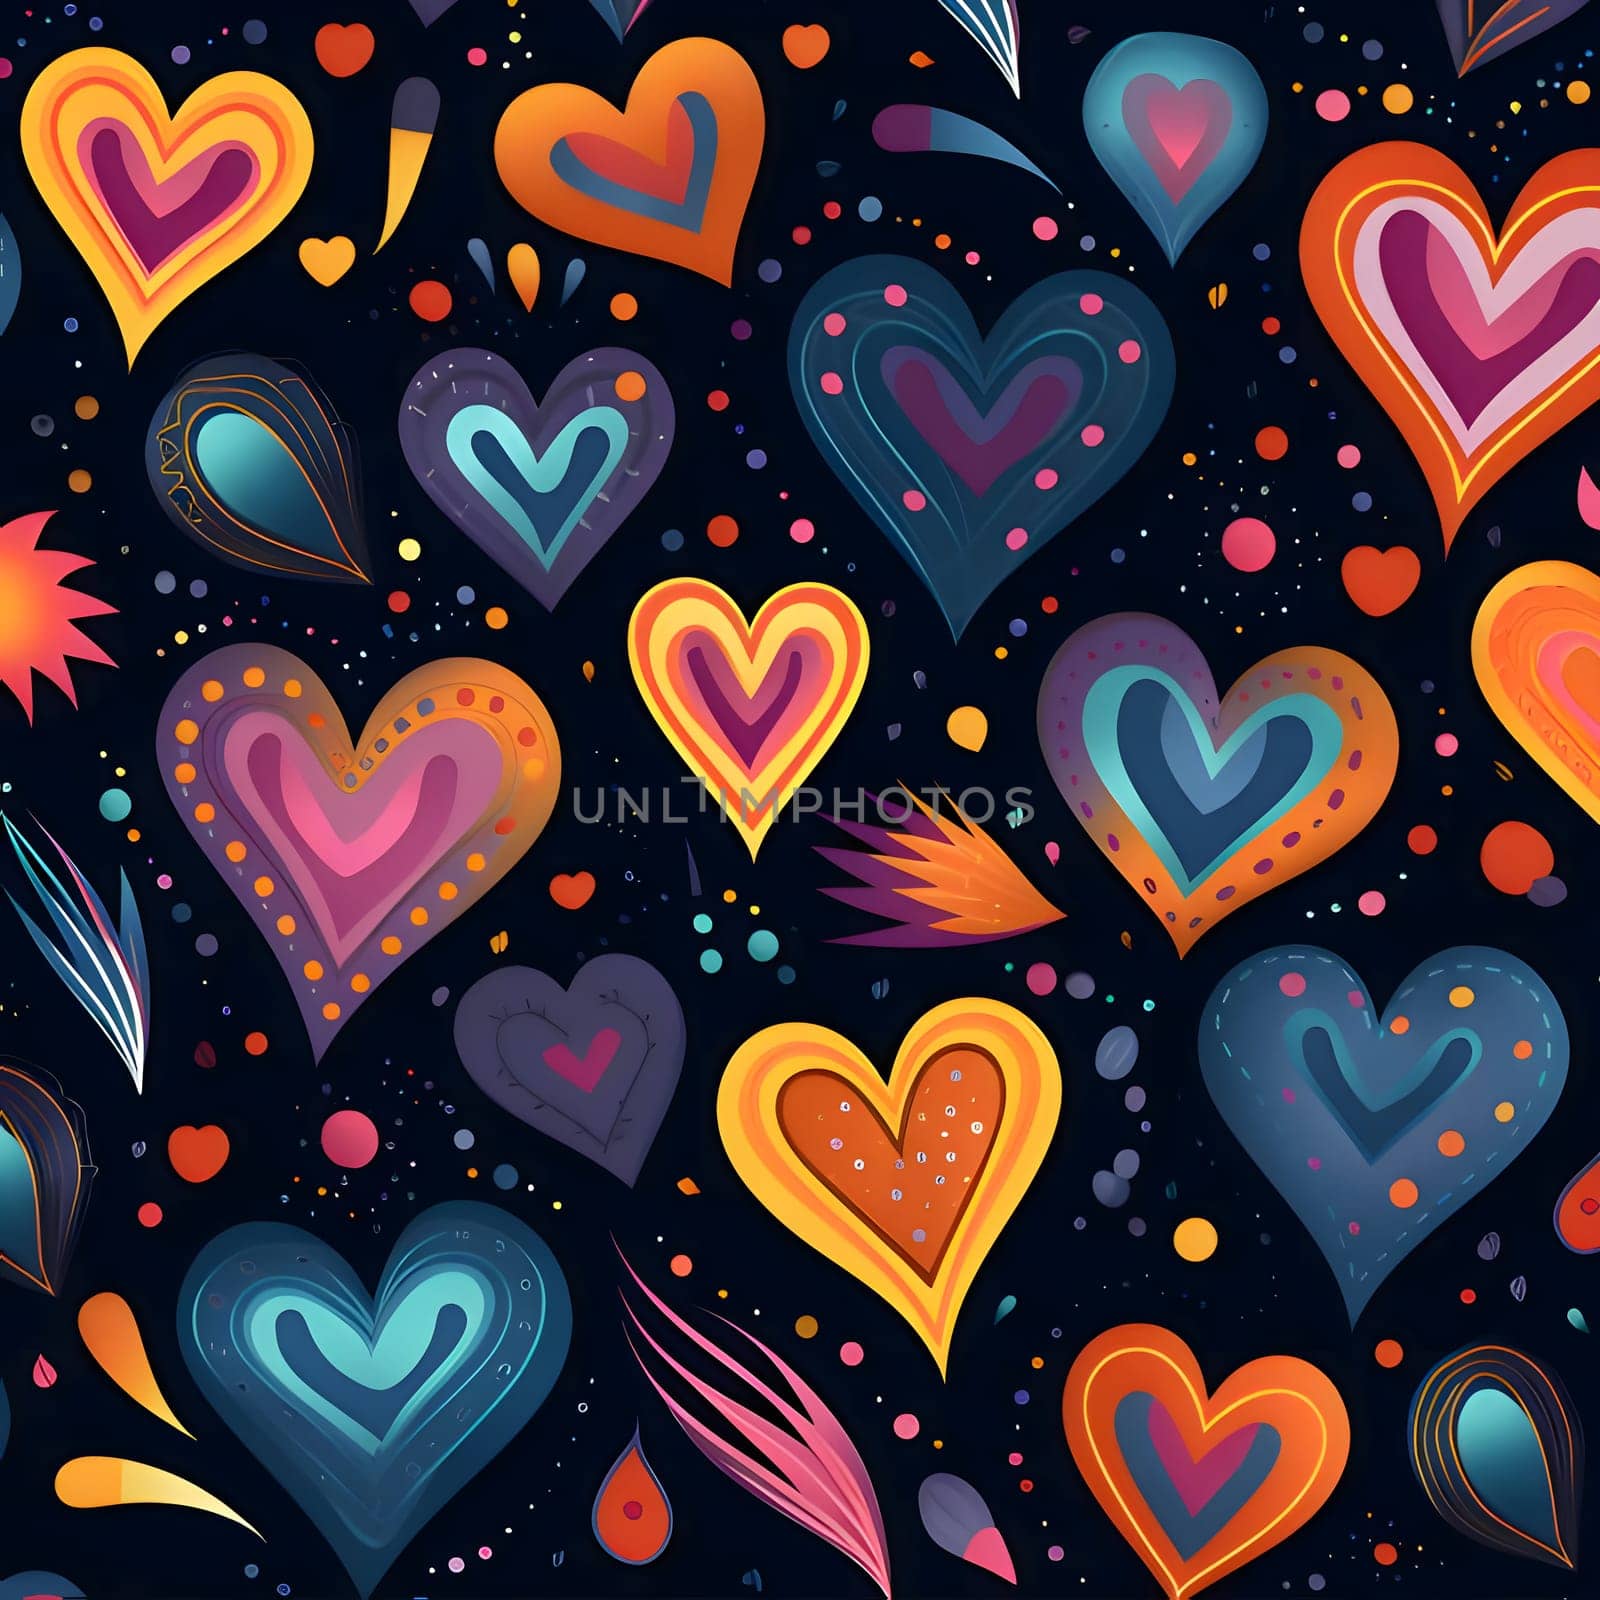 Patterns and banners backgrounds: Seamless pattern with colorful hearts on dark background. Vector illustration.